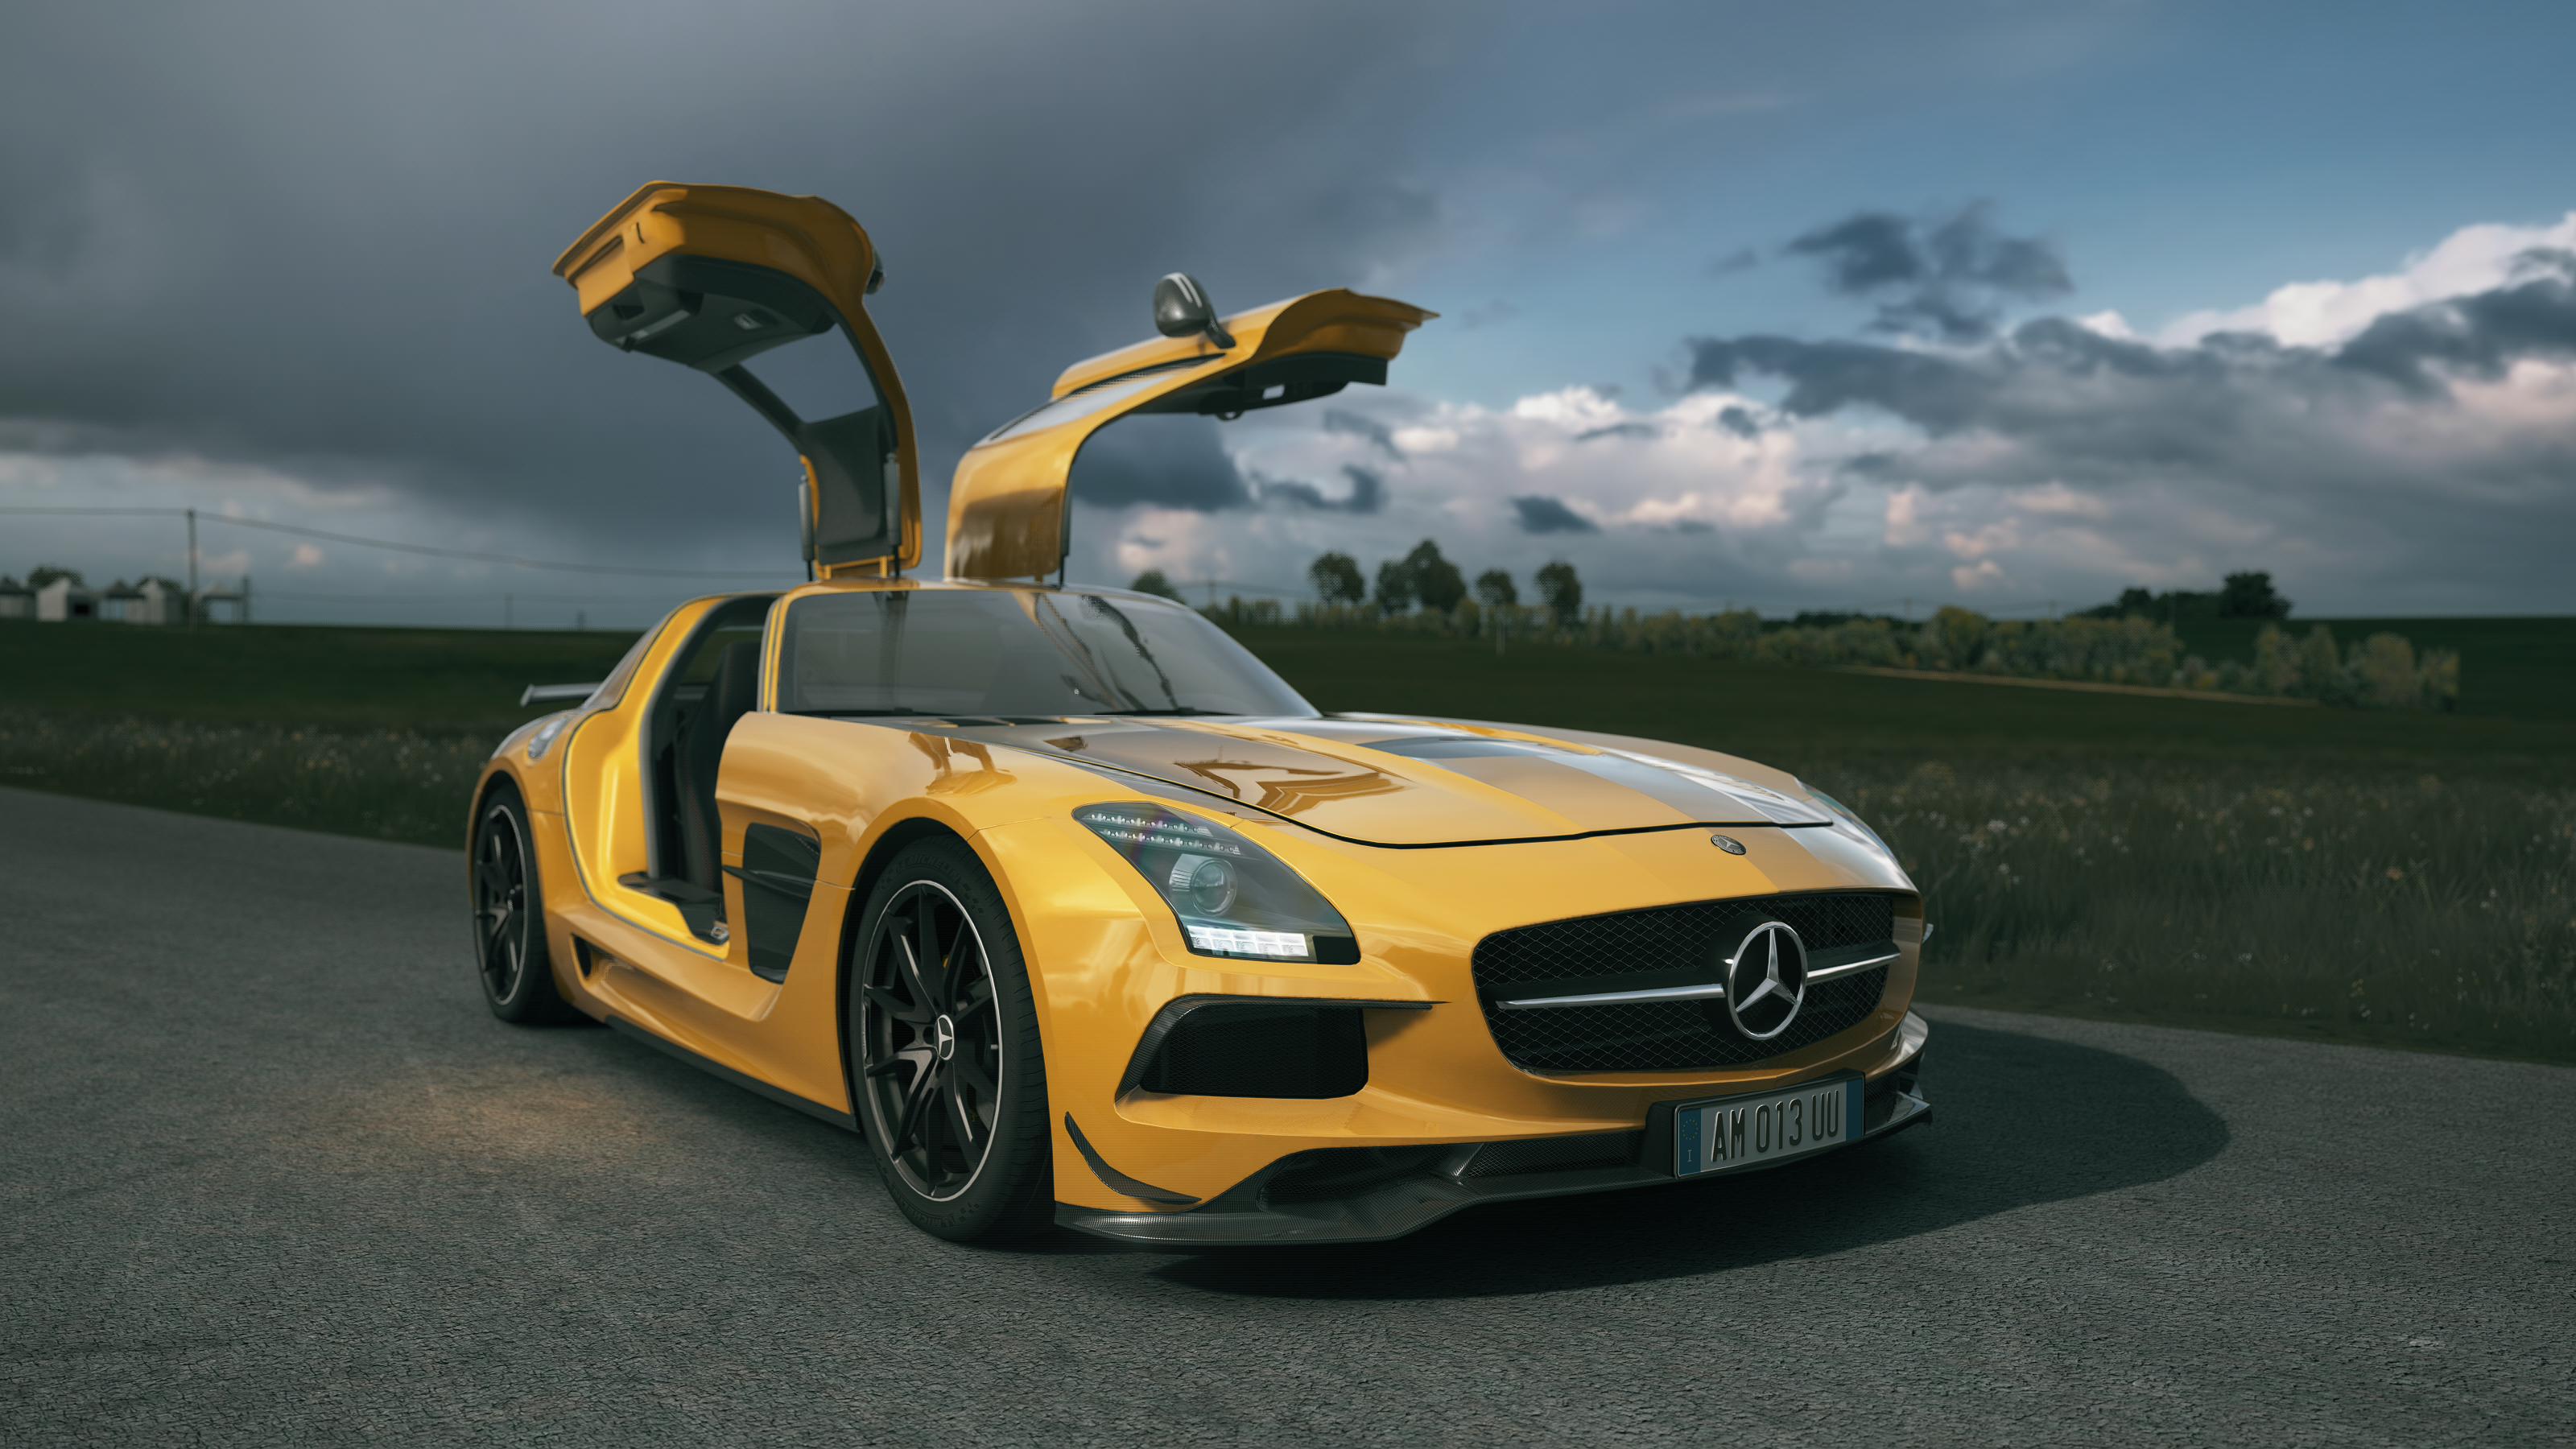 General 3200x1800 Assetto Corsa Assetto Corsa Competizione Mercedes-Benz Mercedes-Benz SLS AMG video game art car clouds PC gaming gull wing doors car spoiler yellow carbon fiber  licence plates vehicle CGI video games sky frontal view